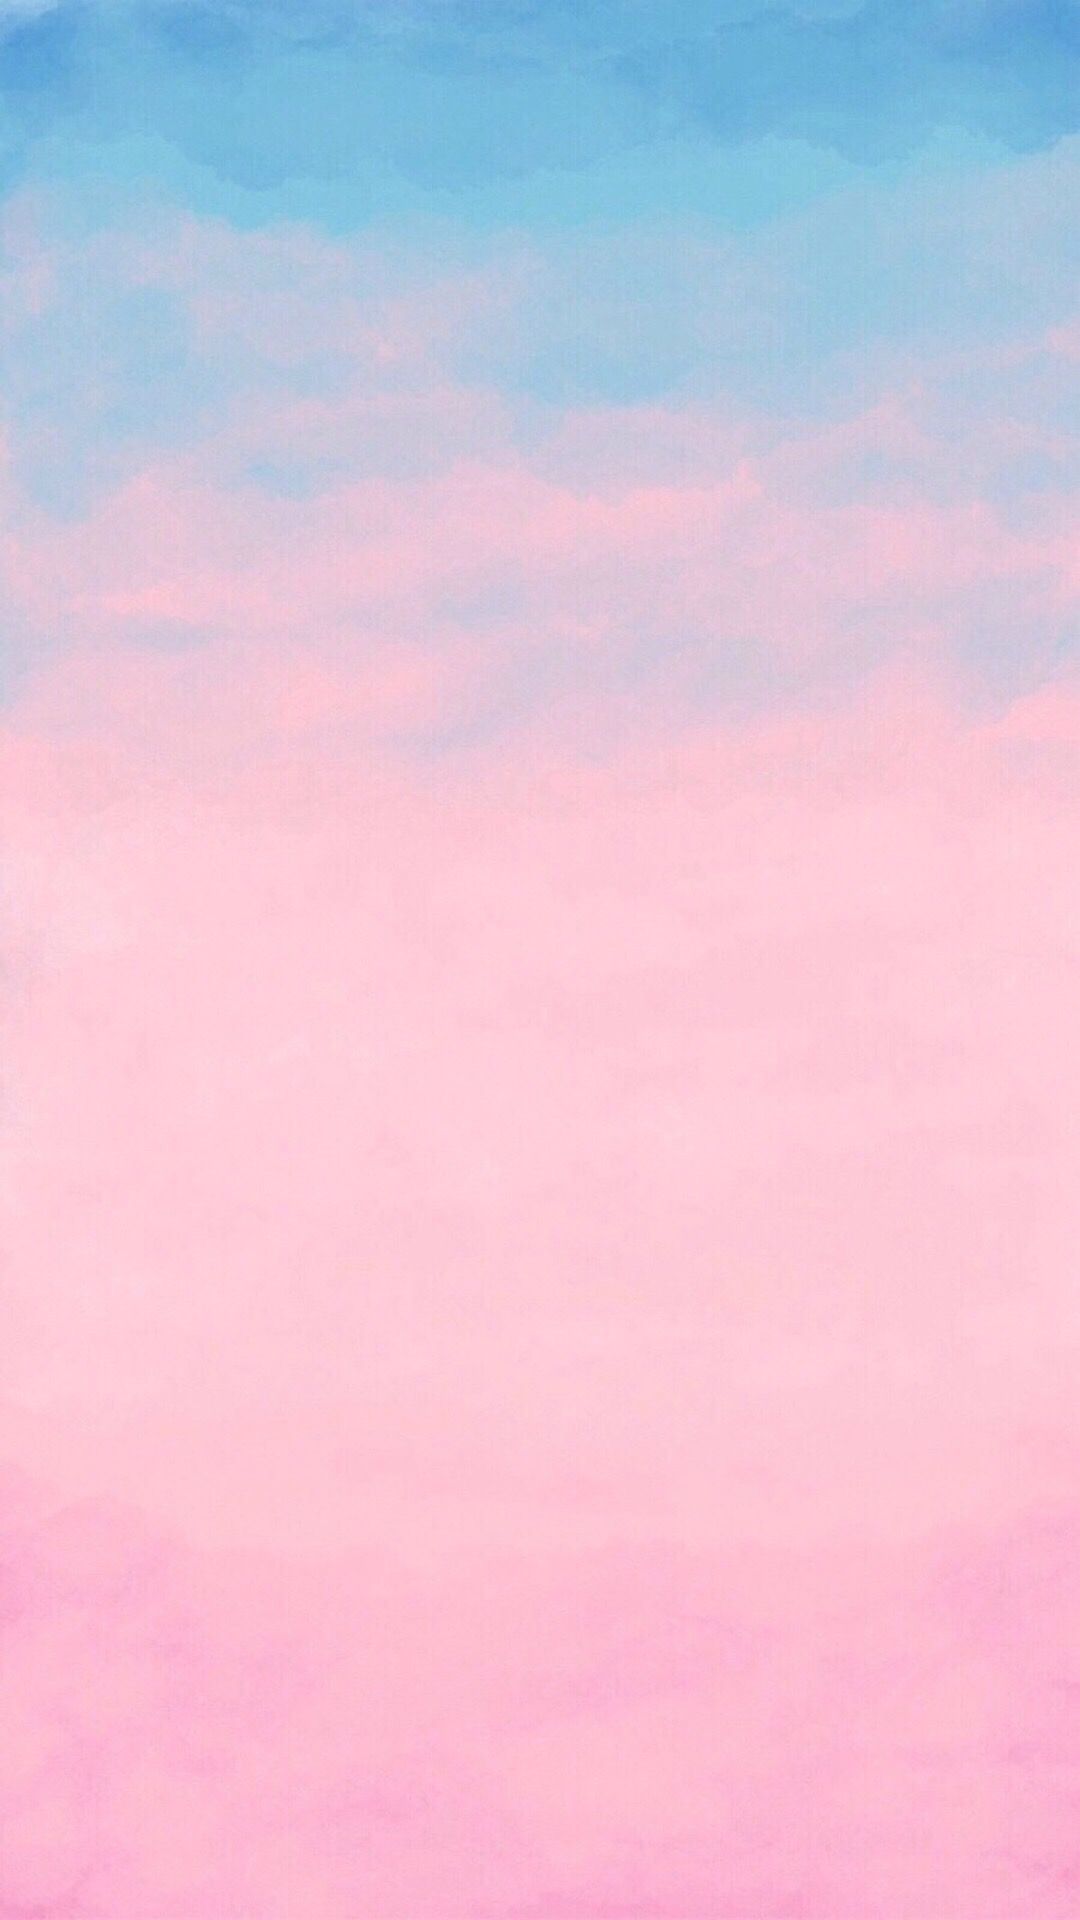 Wallpaper Warna Pink - Pastel Pink And Blue Background ...